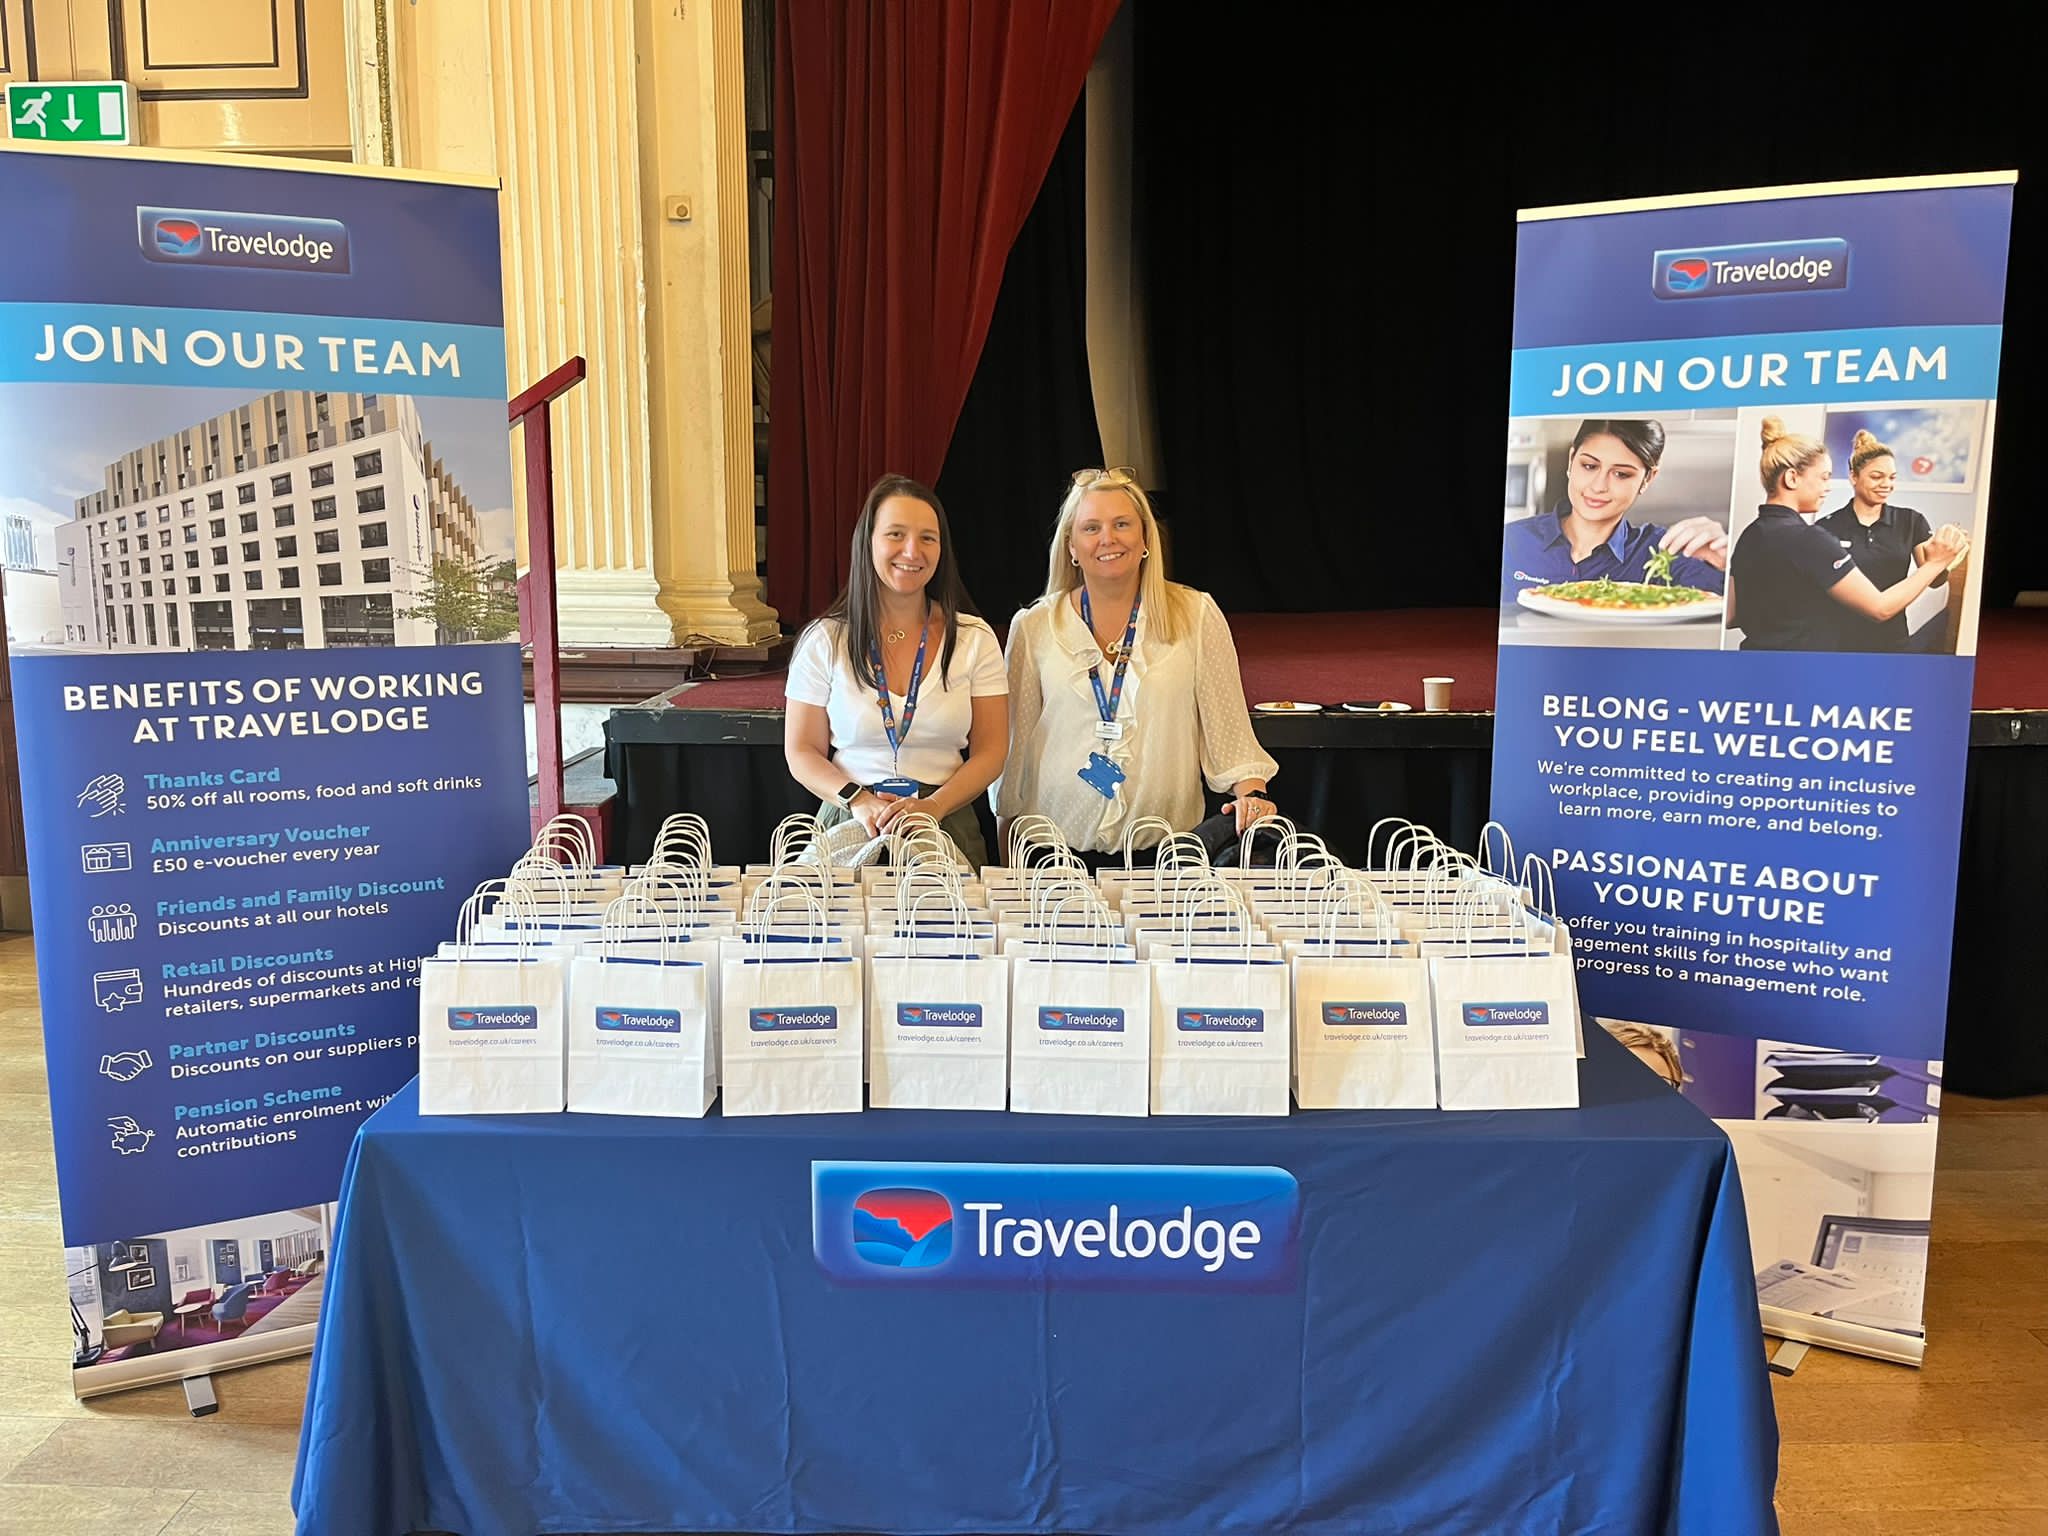 Travelodge at our event in East London